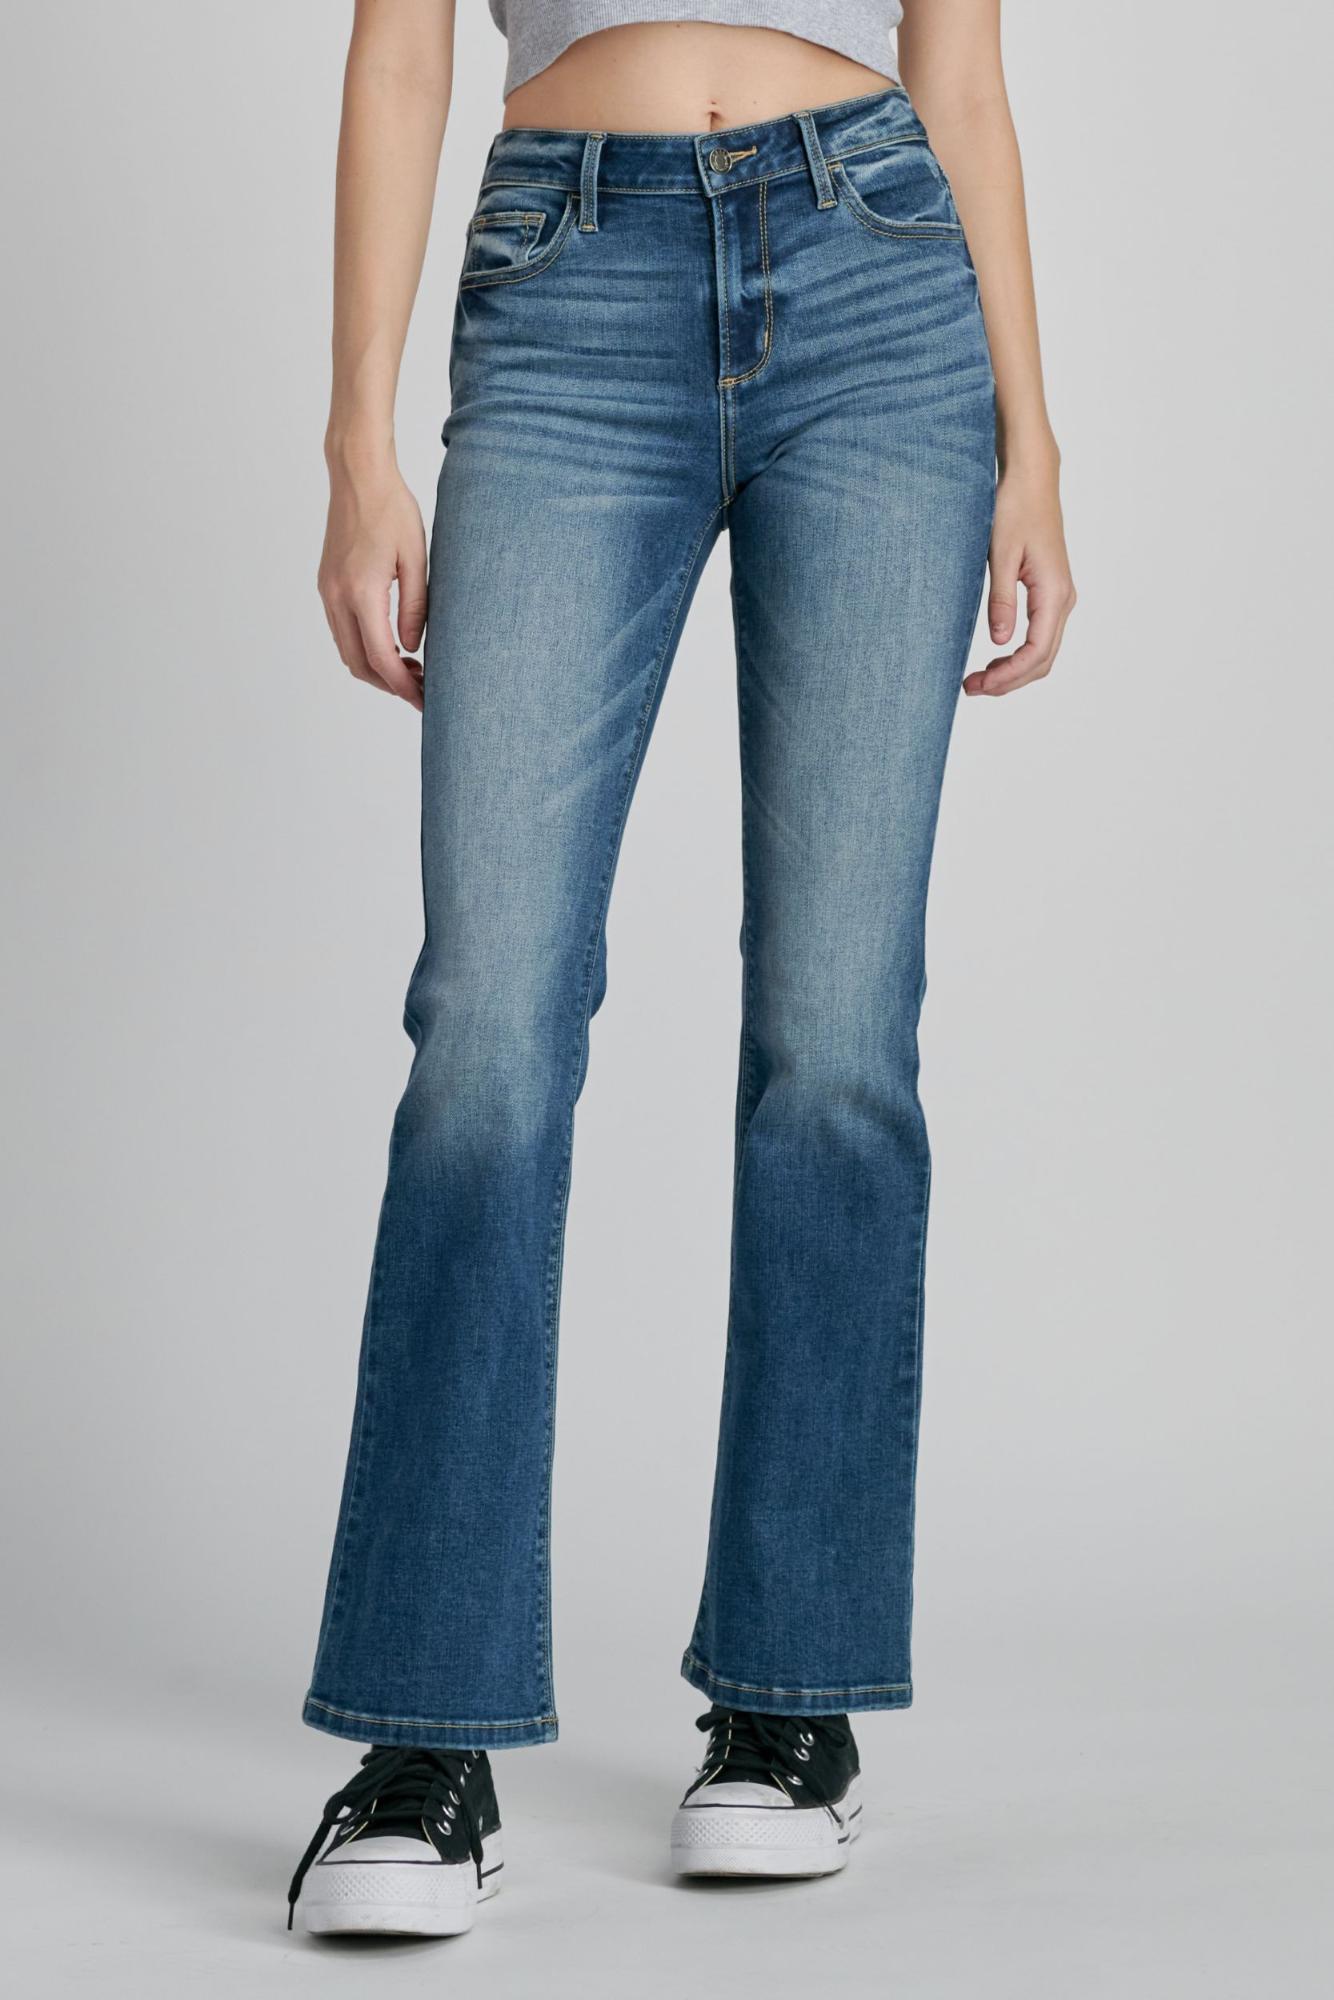 The Jessi Mid Rise Boot Cut Jeans